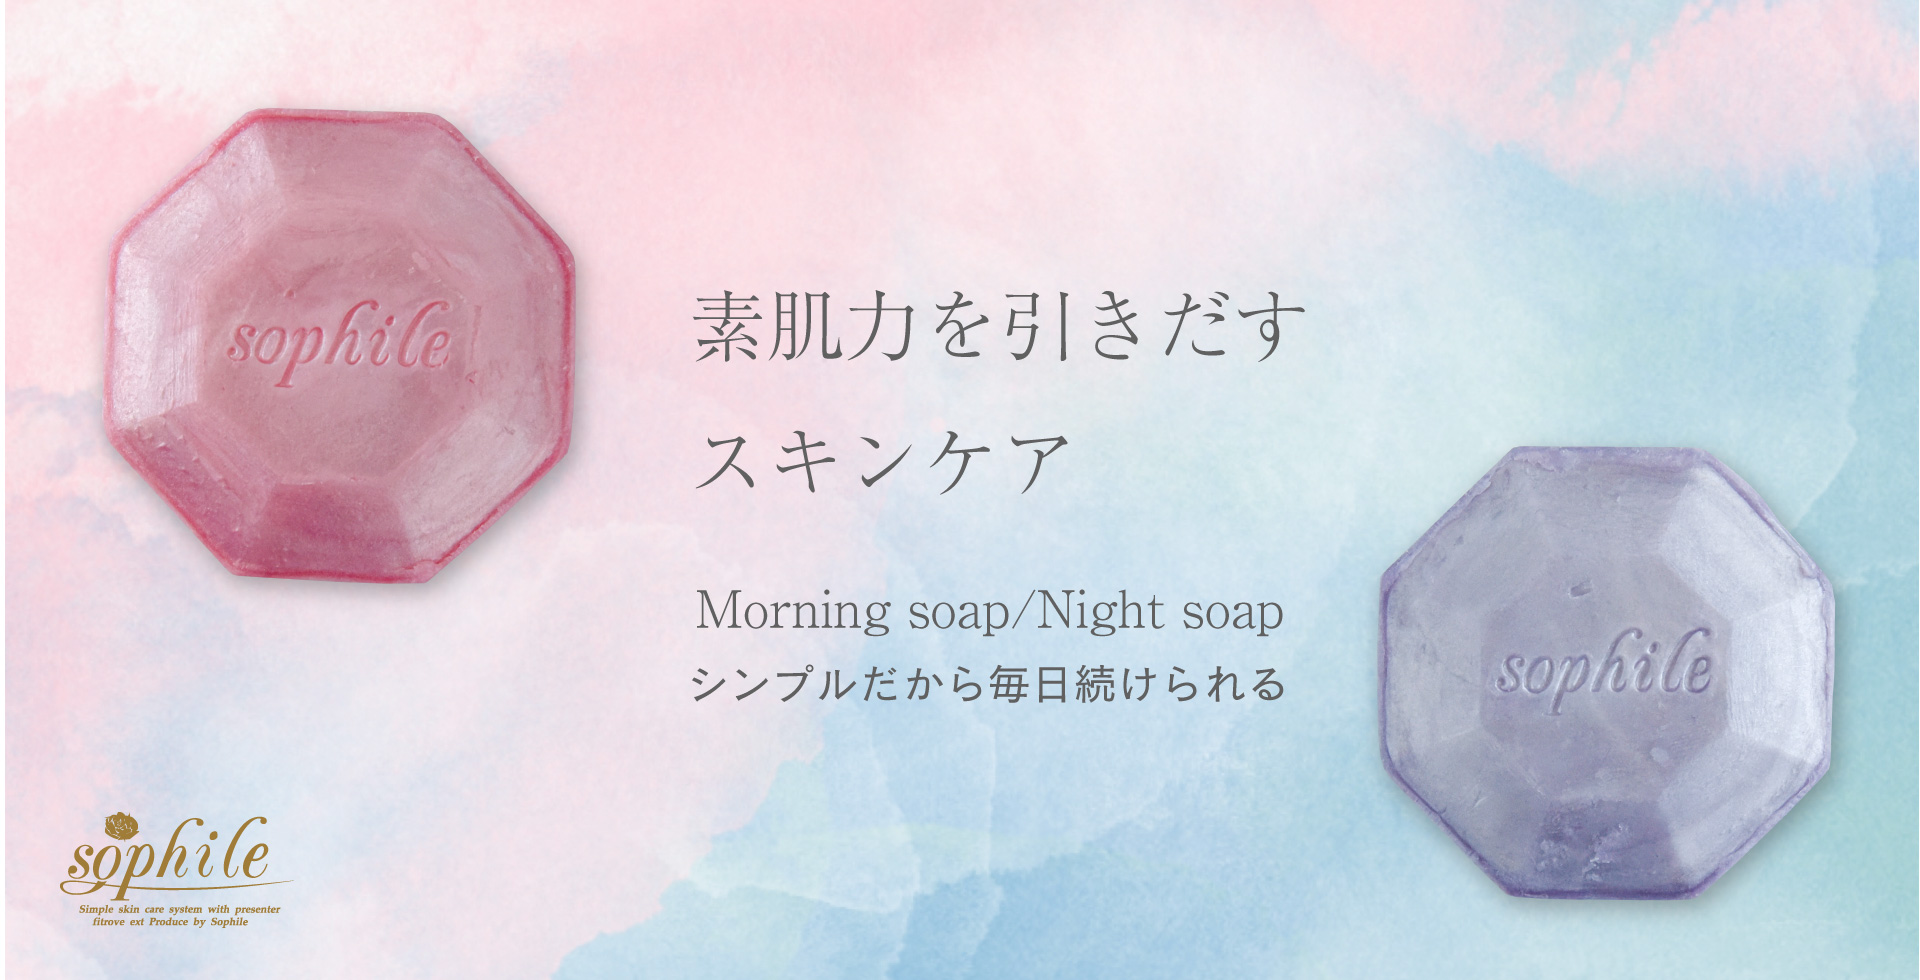 sophite 素肌力を引きだすスキンケア
Morning soap Night soap シンプルだから毎日続けられる sophite sophile Simple skin care system with presenter fitrove ext Produce by Sophile